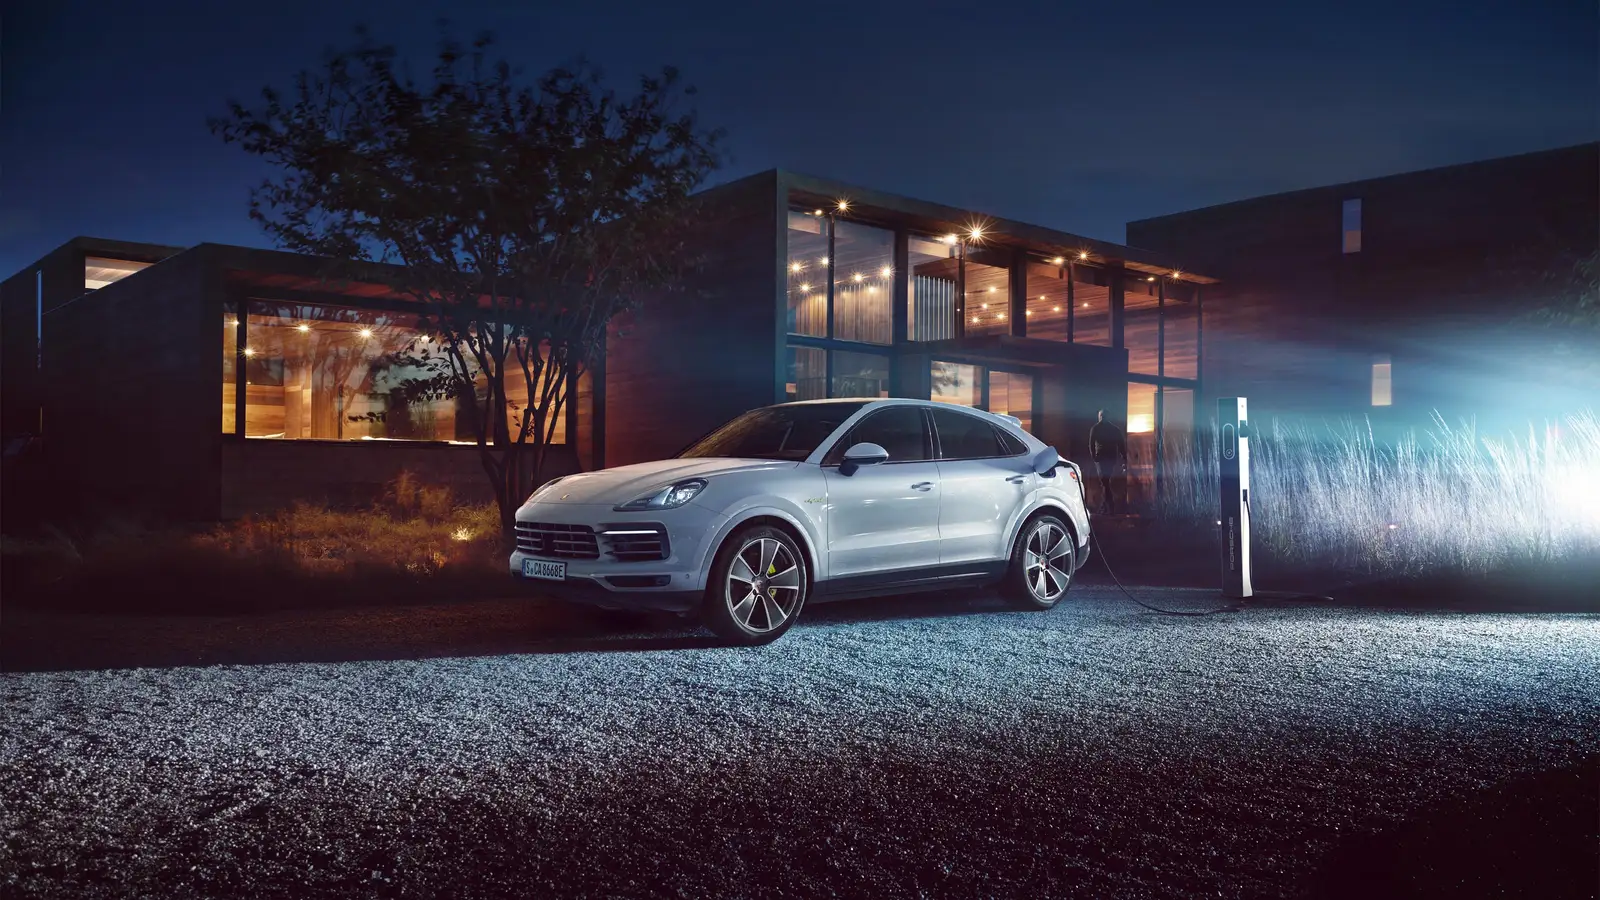 Porsche South Orlando is proud to offer the most unique and exciting new Porsche Cayenne Coupe. The world’s first electric-only performance coupe will have you on your way in no time.